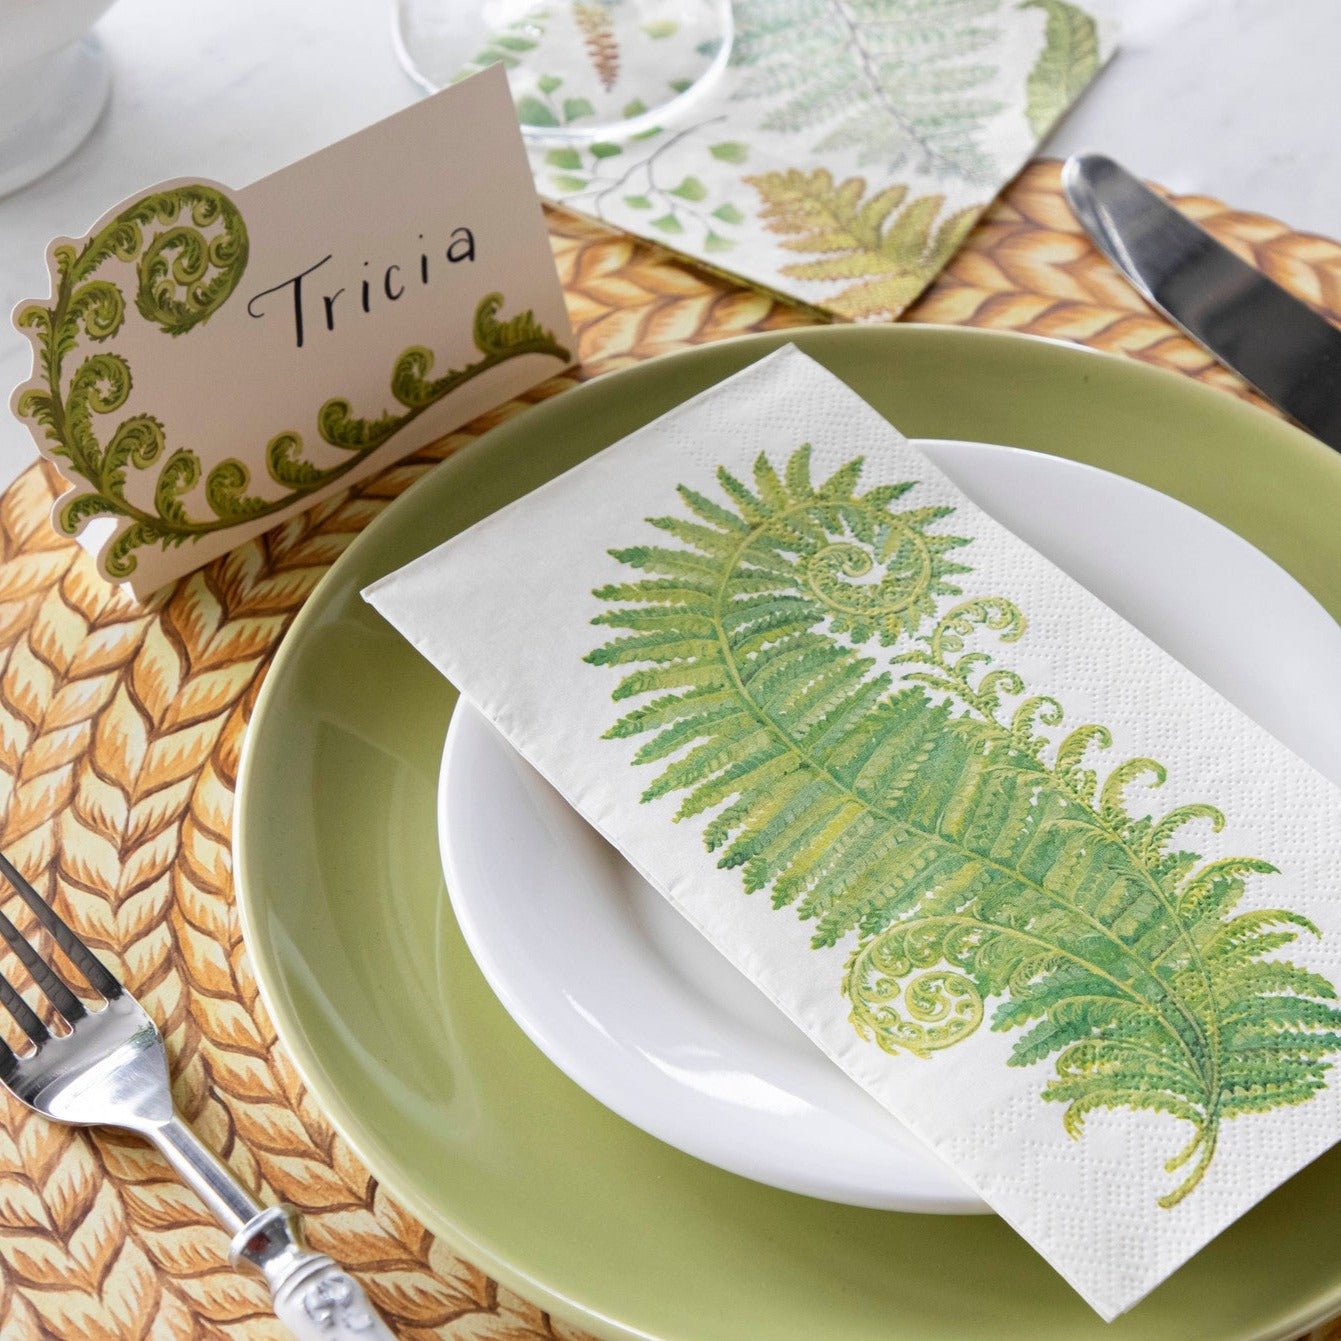 An elegant place setting with a Fern Guest Napkin on the plate, and a Fern Cocktail Napkin under the glass.